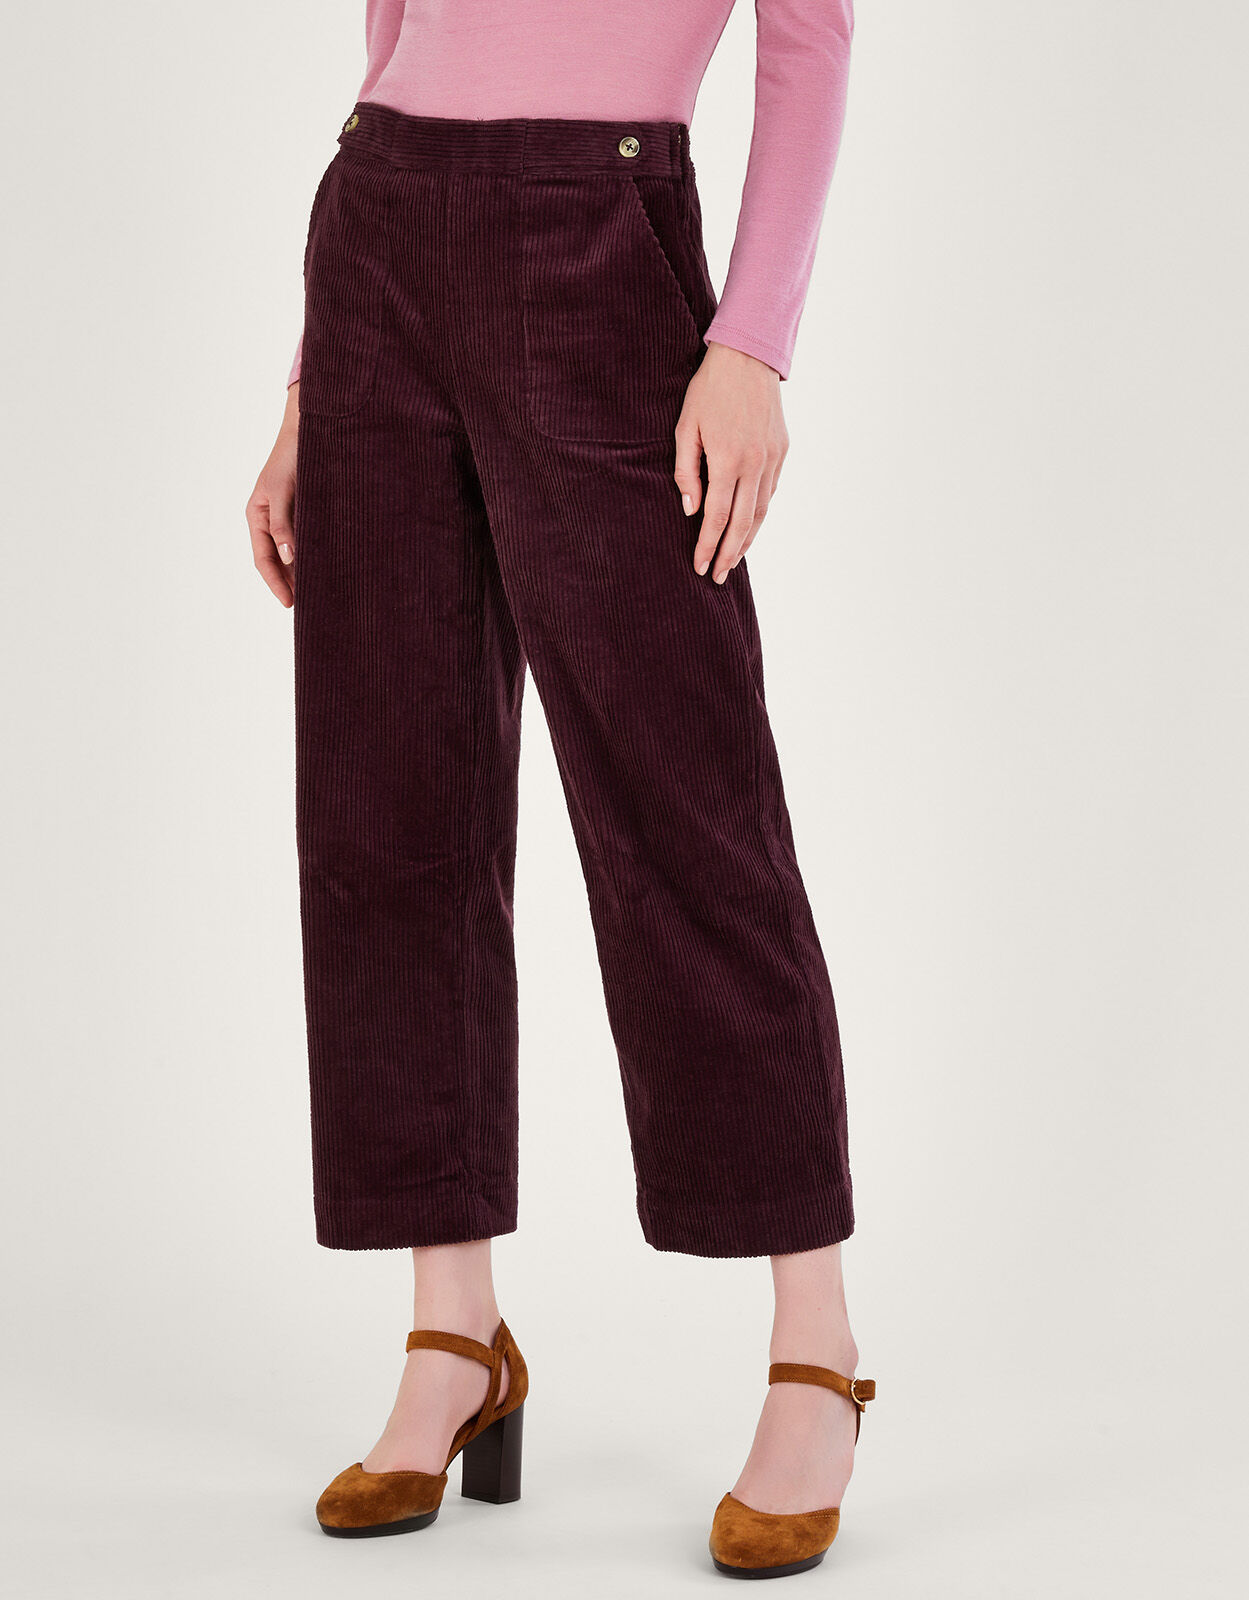 Buy Nuon Solid Navy Blue Corduroy Pants from Westside